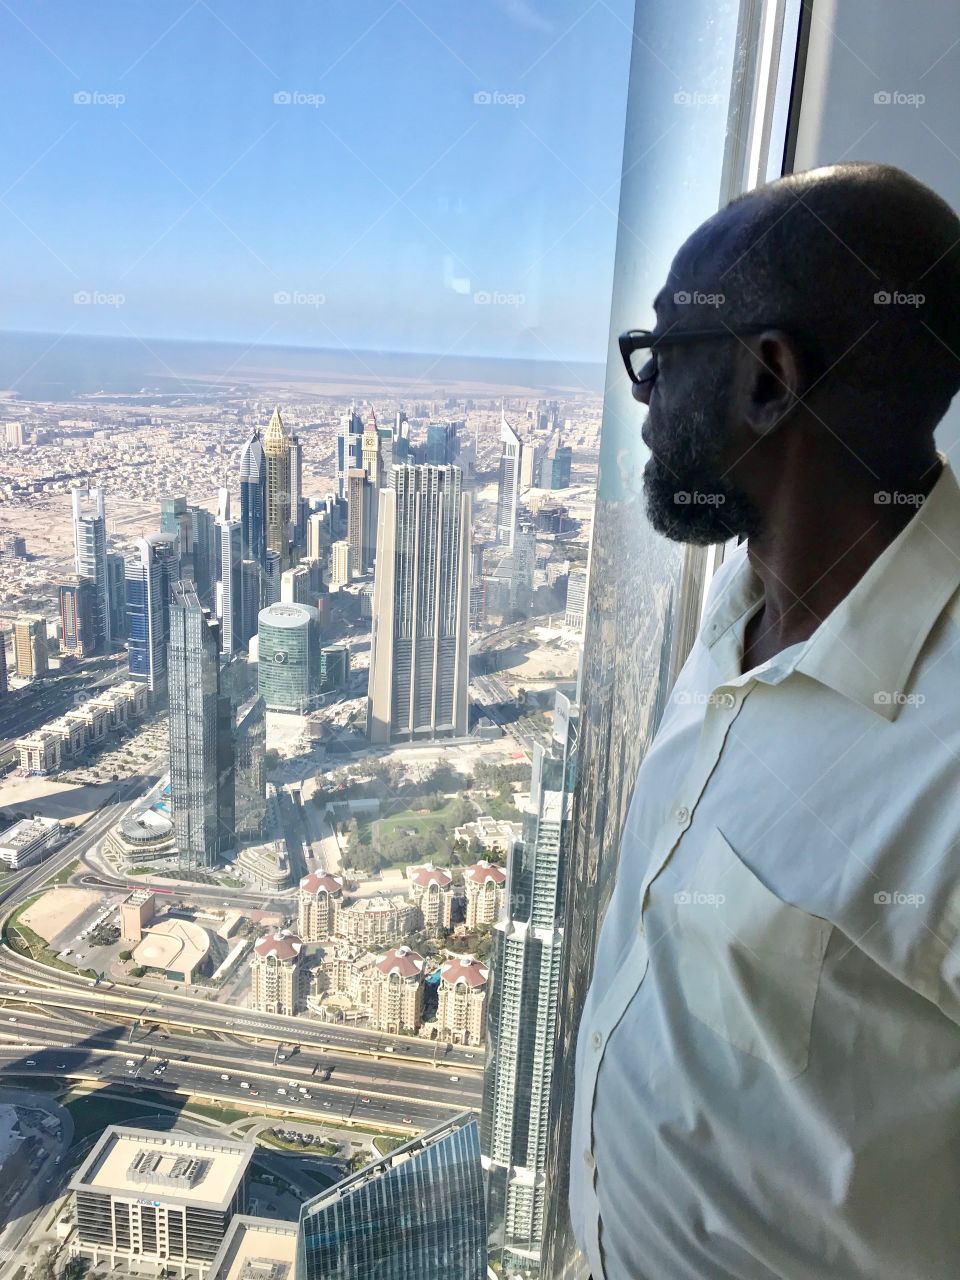 Looking down on the Dubai City from the 125th floor of the Burj Khalifa. £20.00 